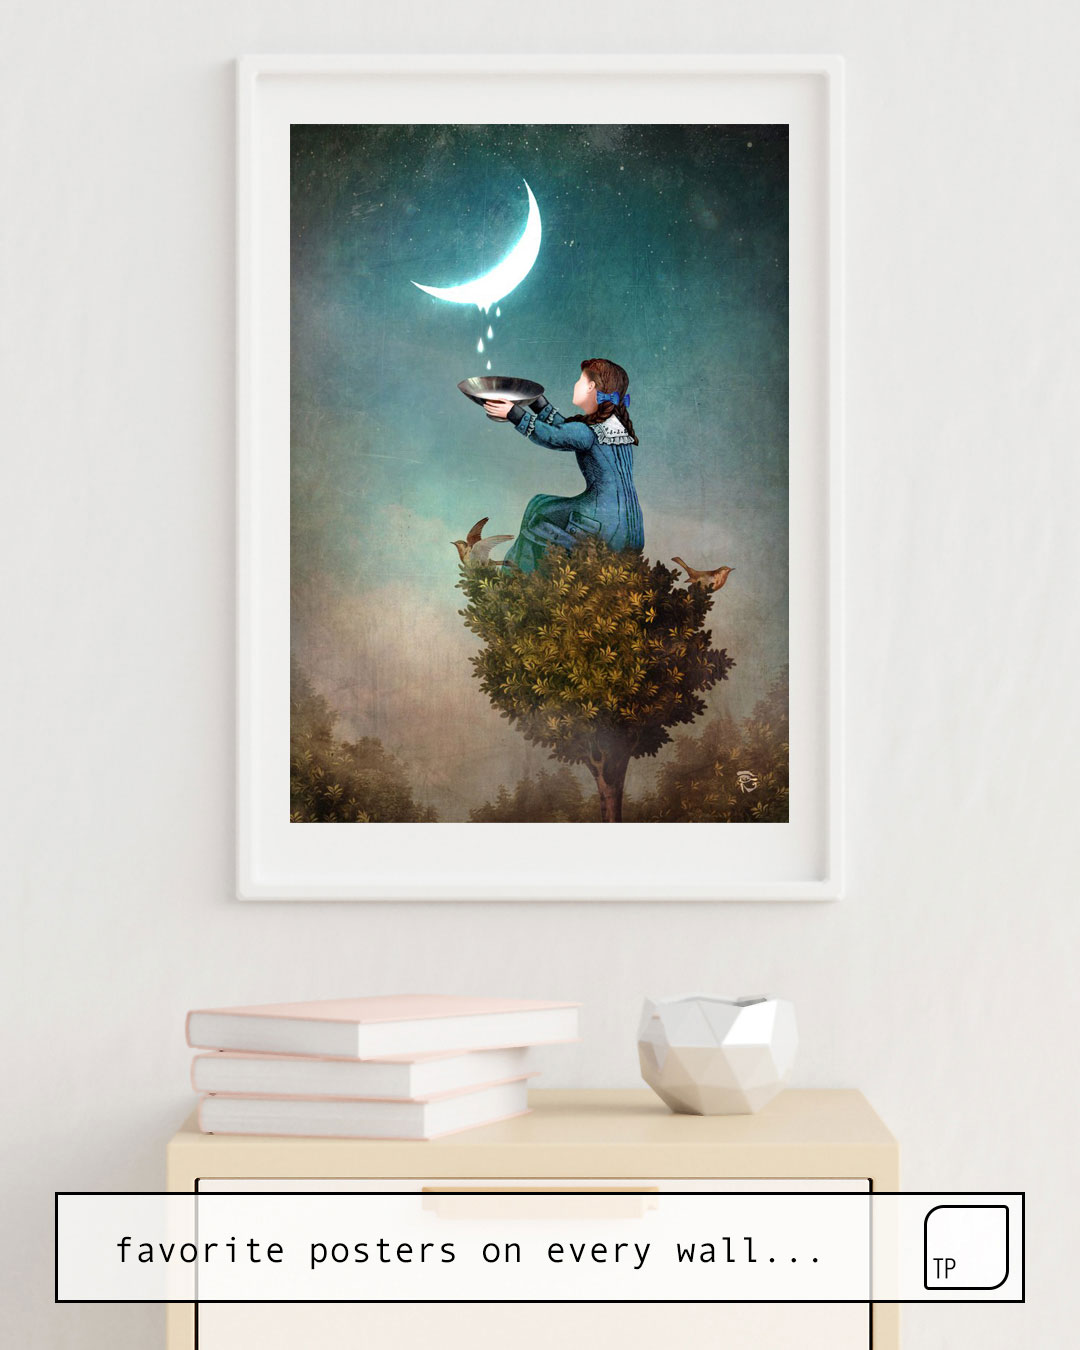 The photo shows an example of furnishing with the motif MOONDROPS by Christian Schloe as mural